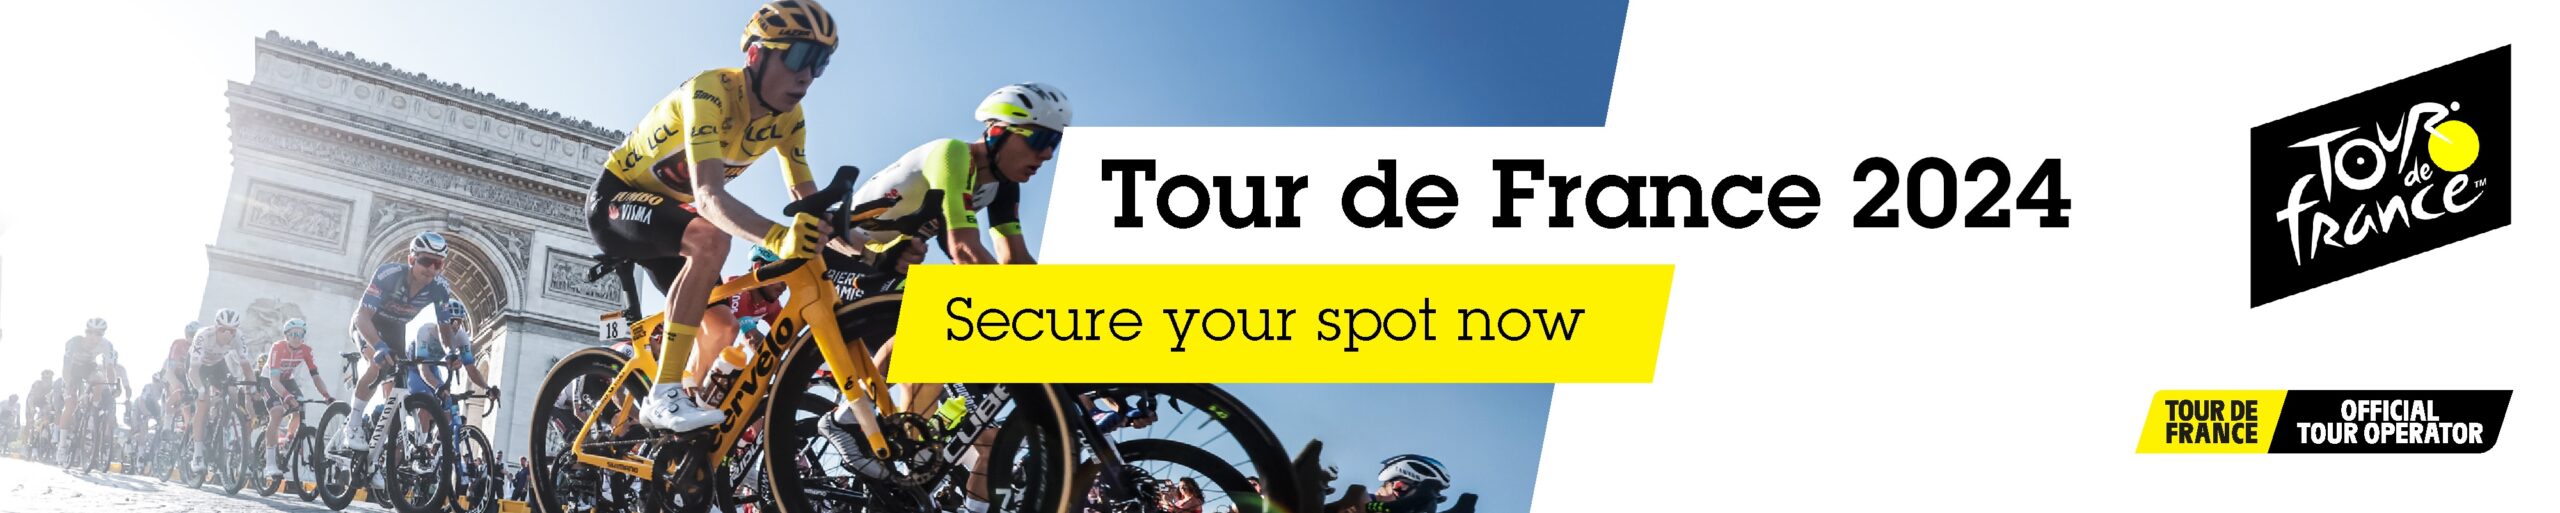 Tour De France Cycling Travel Tours Operators | Guided Cycling Holidays ...